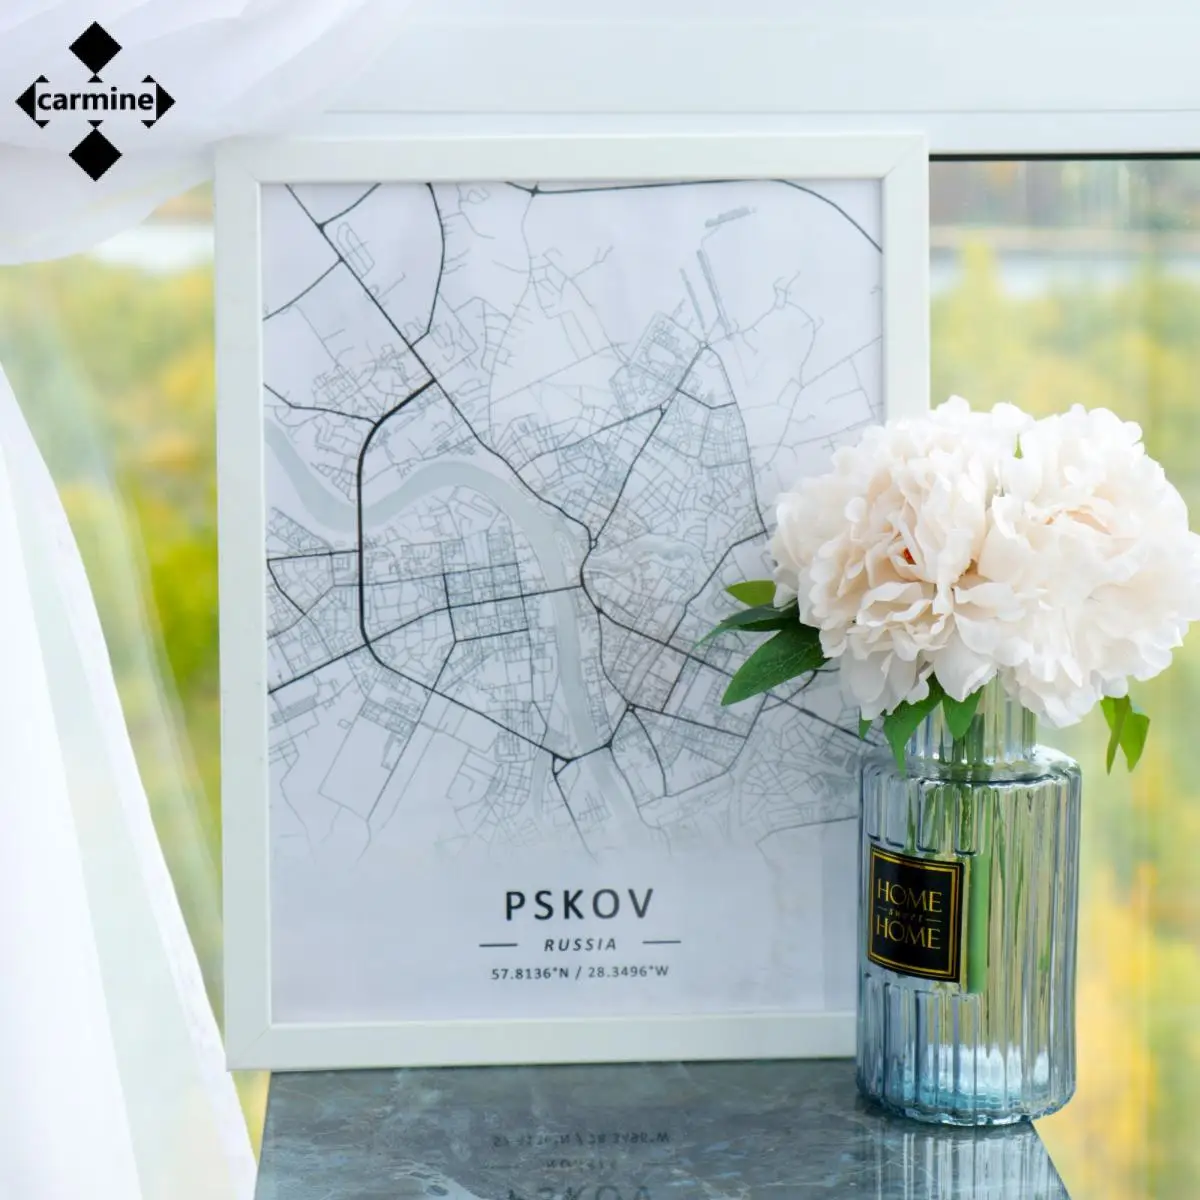 Personalised Wall Art: Prints, Maps & Posters